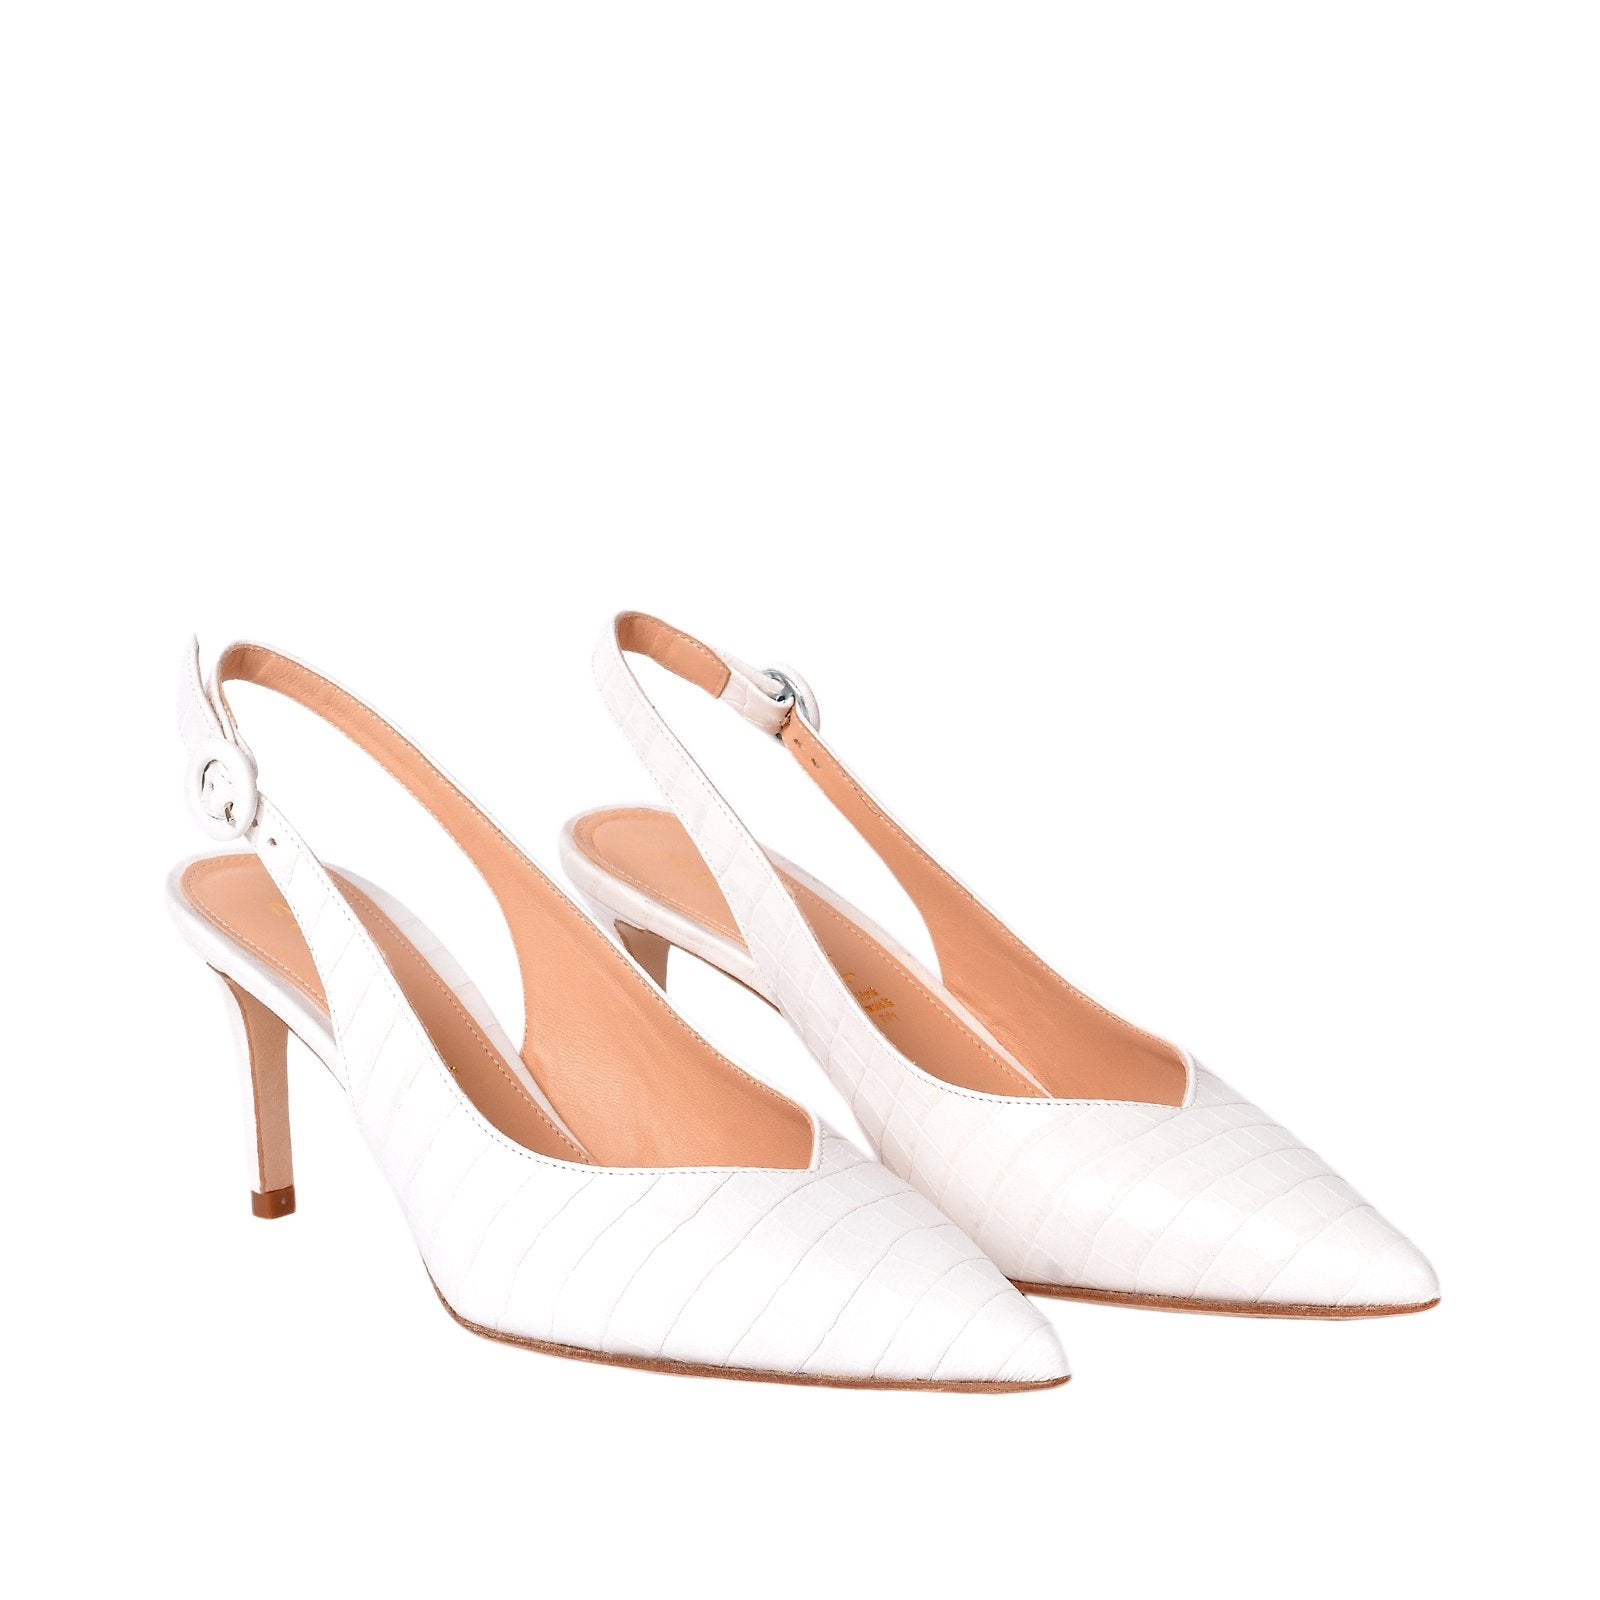 Cocco White Sling Back Pumps Heels 1039/White - 2